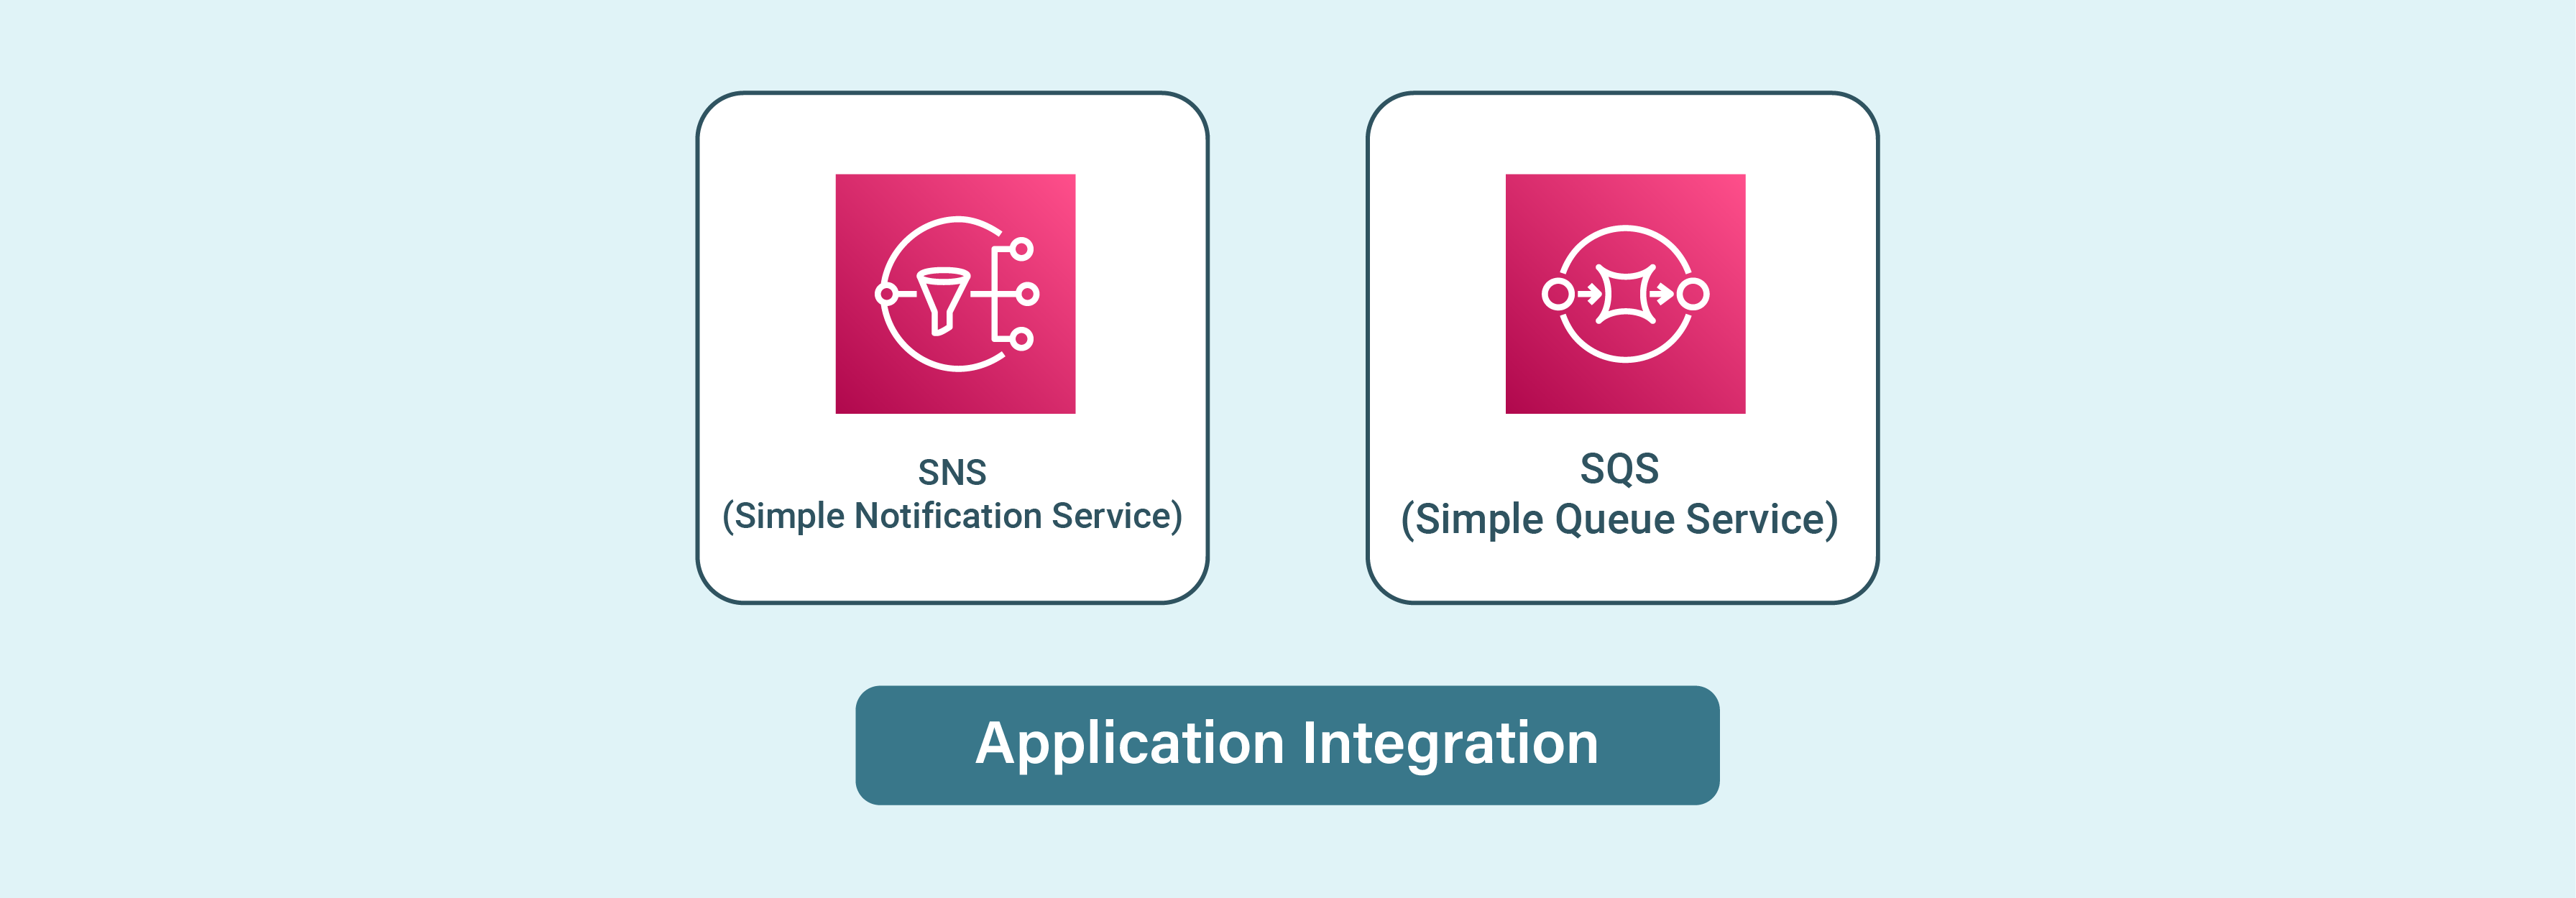 Application Integration in Managed Magento AWS Hosting